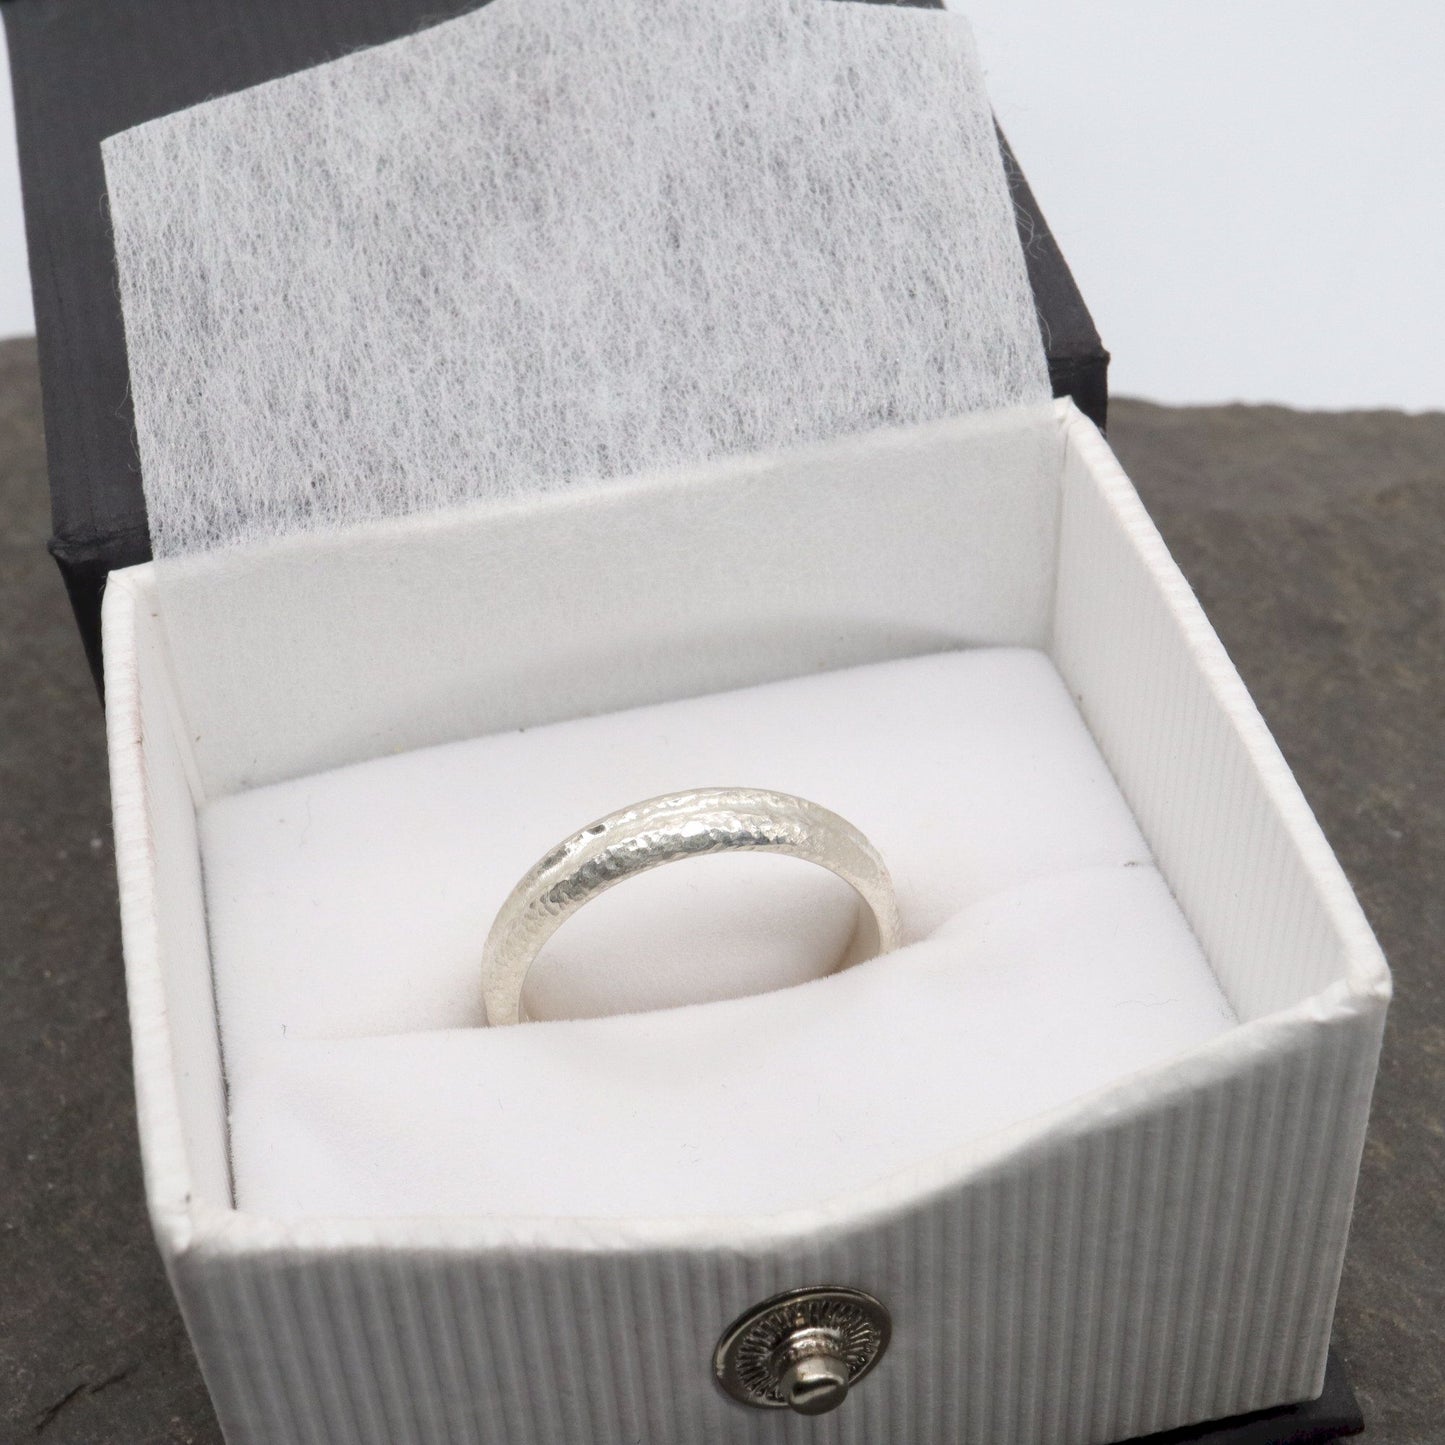 White gold narrow wedding ring with a carved rustic pattern, Fleetwith Pike design.